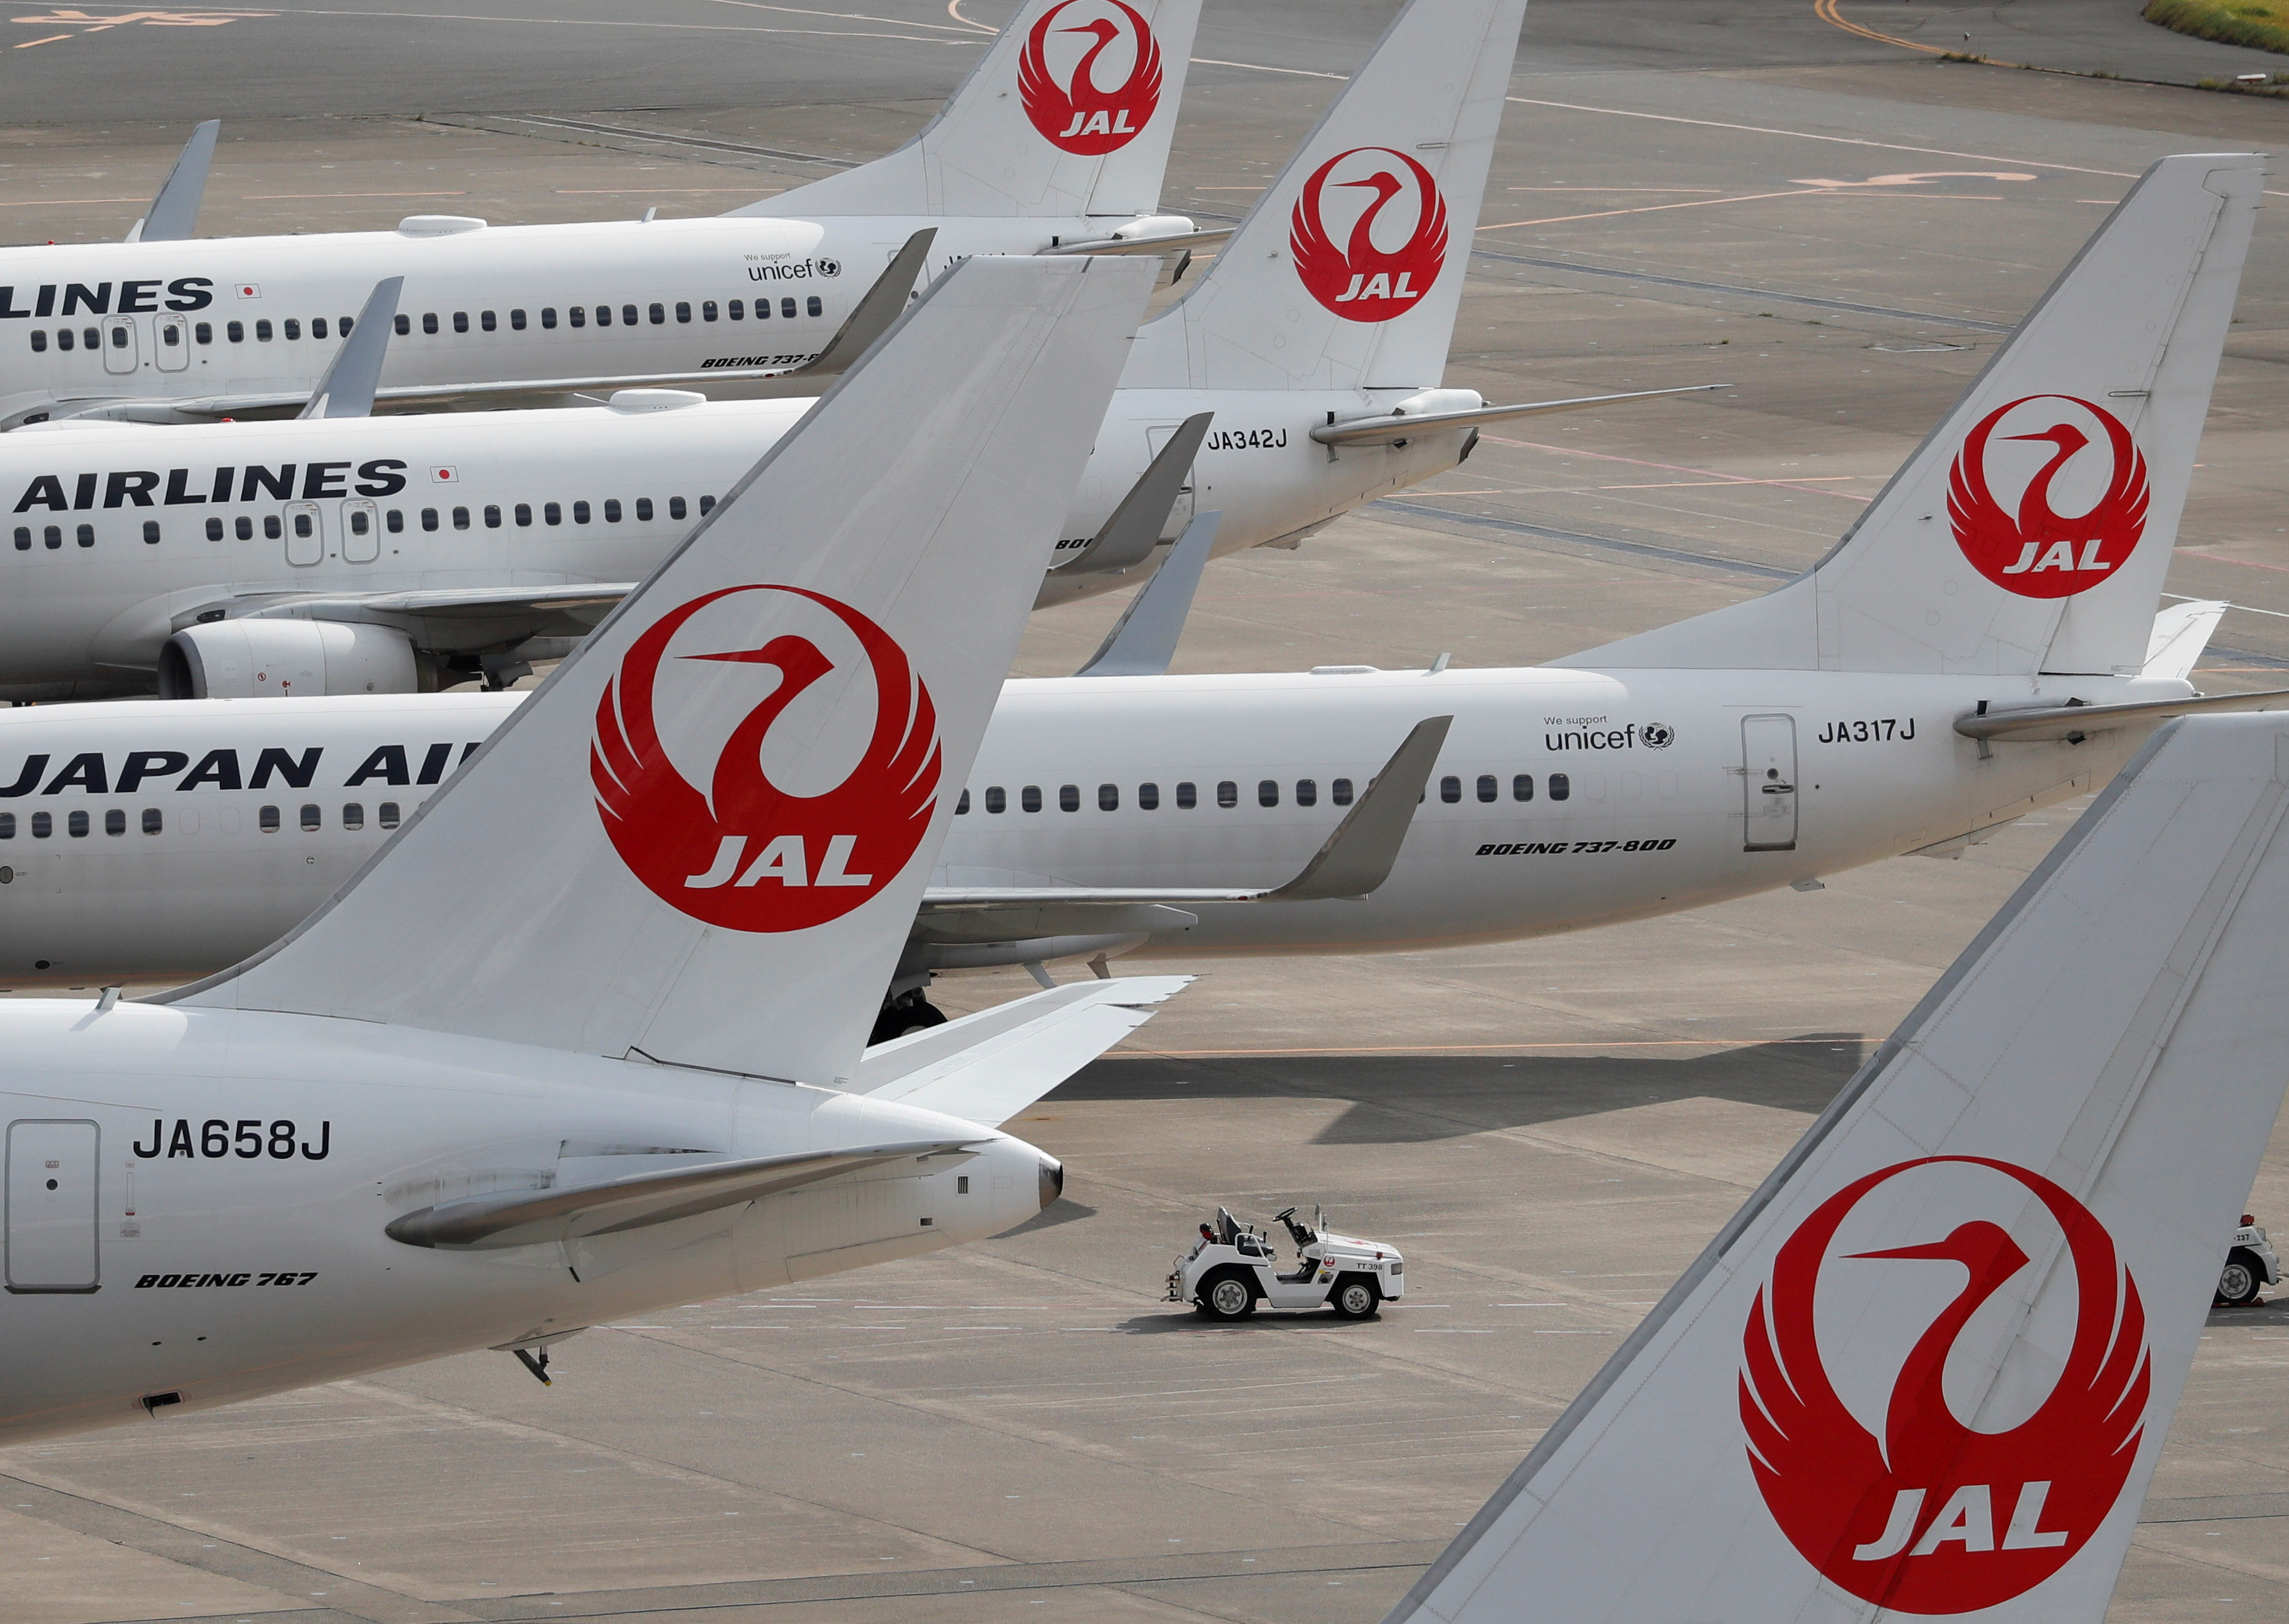 FILE PHOTO: Japan Airlines' (JAL) airplanes are seen, amid the coronavirus disease (COVID-19) outbreak, at the Tokyo International Airport, commonly known as Haneda Airport in Tokyo, Japan October 30, 2020. REUTERS/Issei Kato